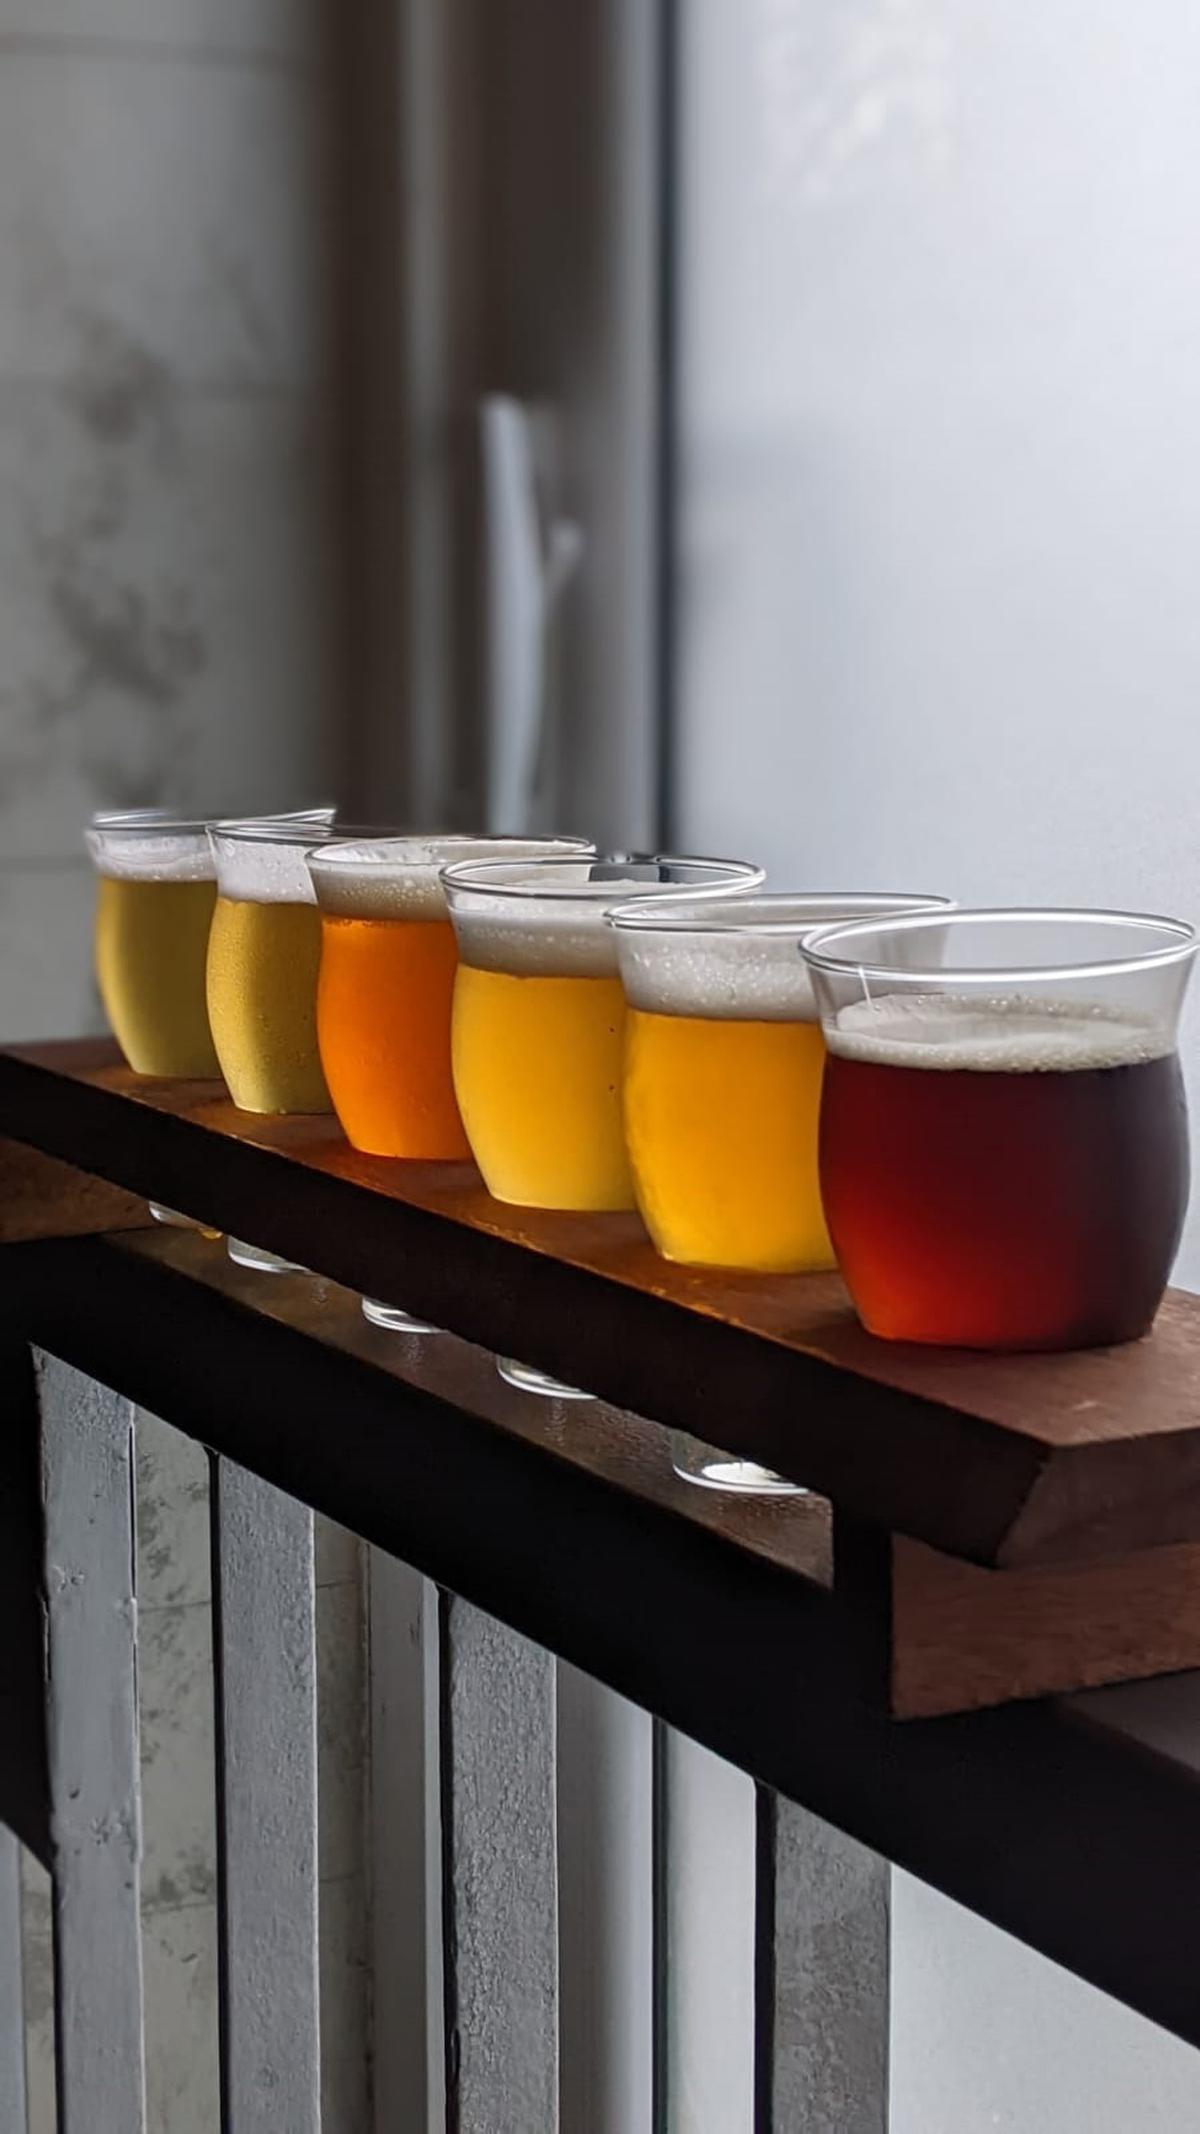 Catamaran Brewing Co. offers eight varieties of craft beer. They are now launching mango cider 